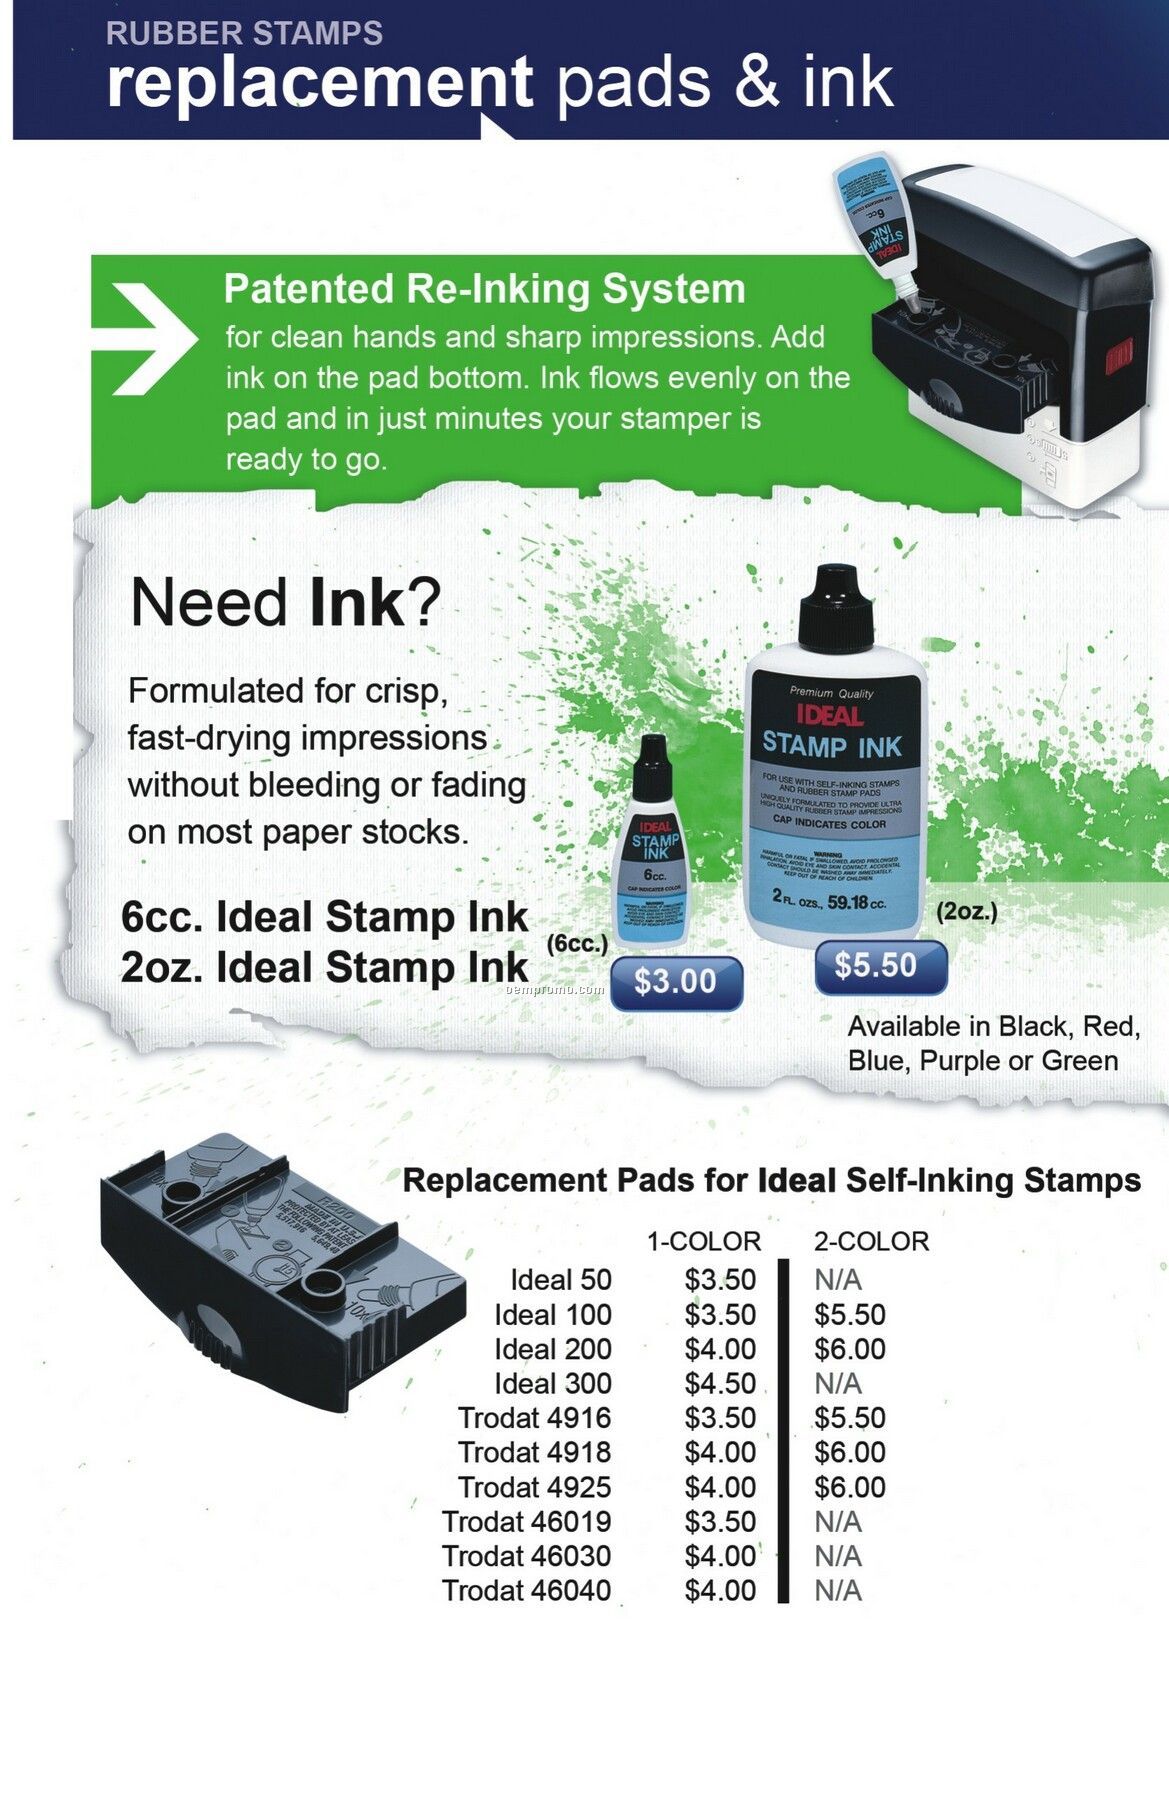 Rubber Stamp Replacement Pads & Ink